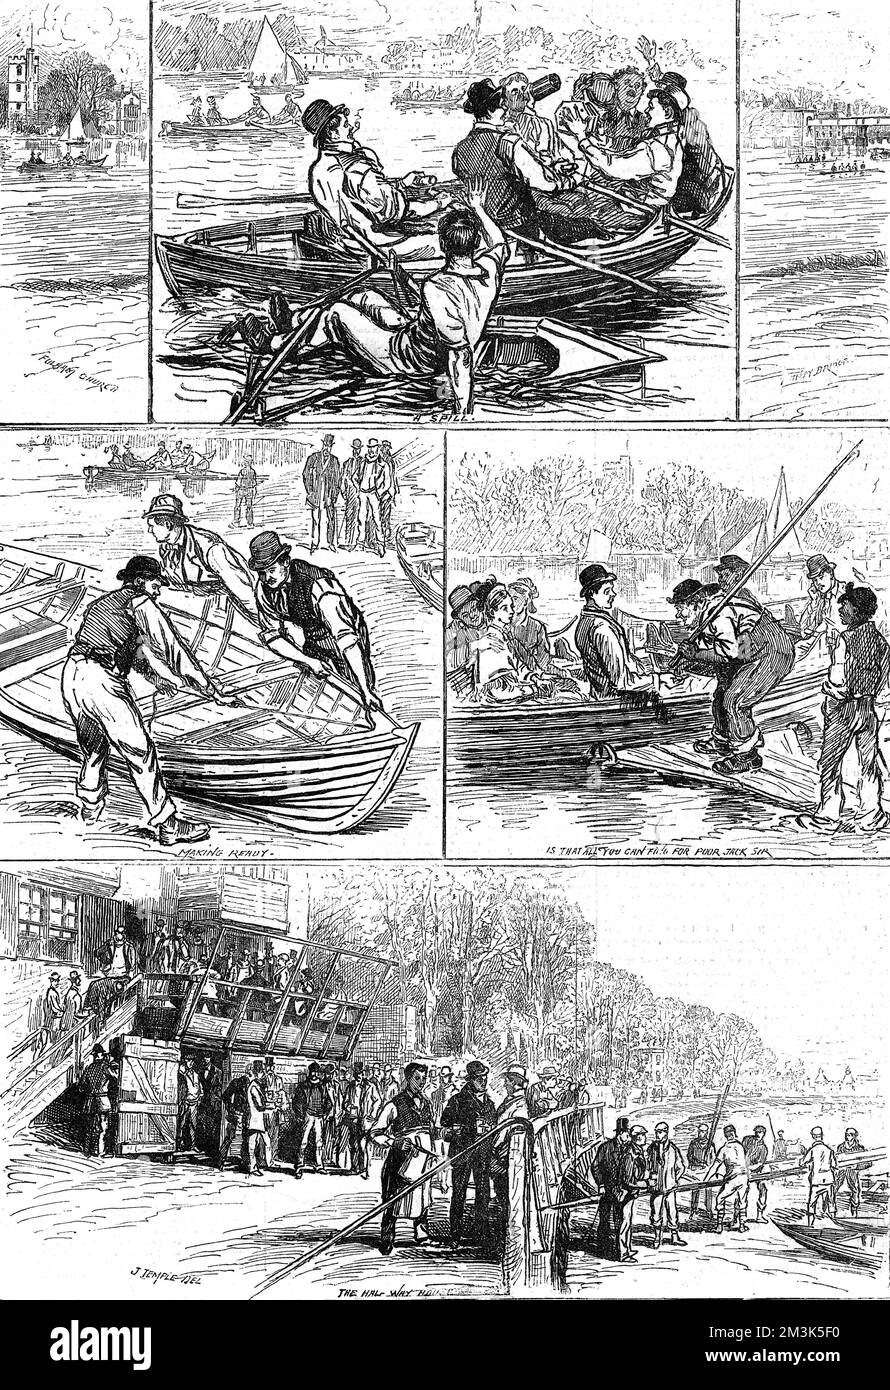 Variety of views of boating amusements on the River Thames during the Bank Holiday of 1877. Rowing boats and the shore (probably at Putney).  1877 Stock Photo